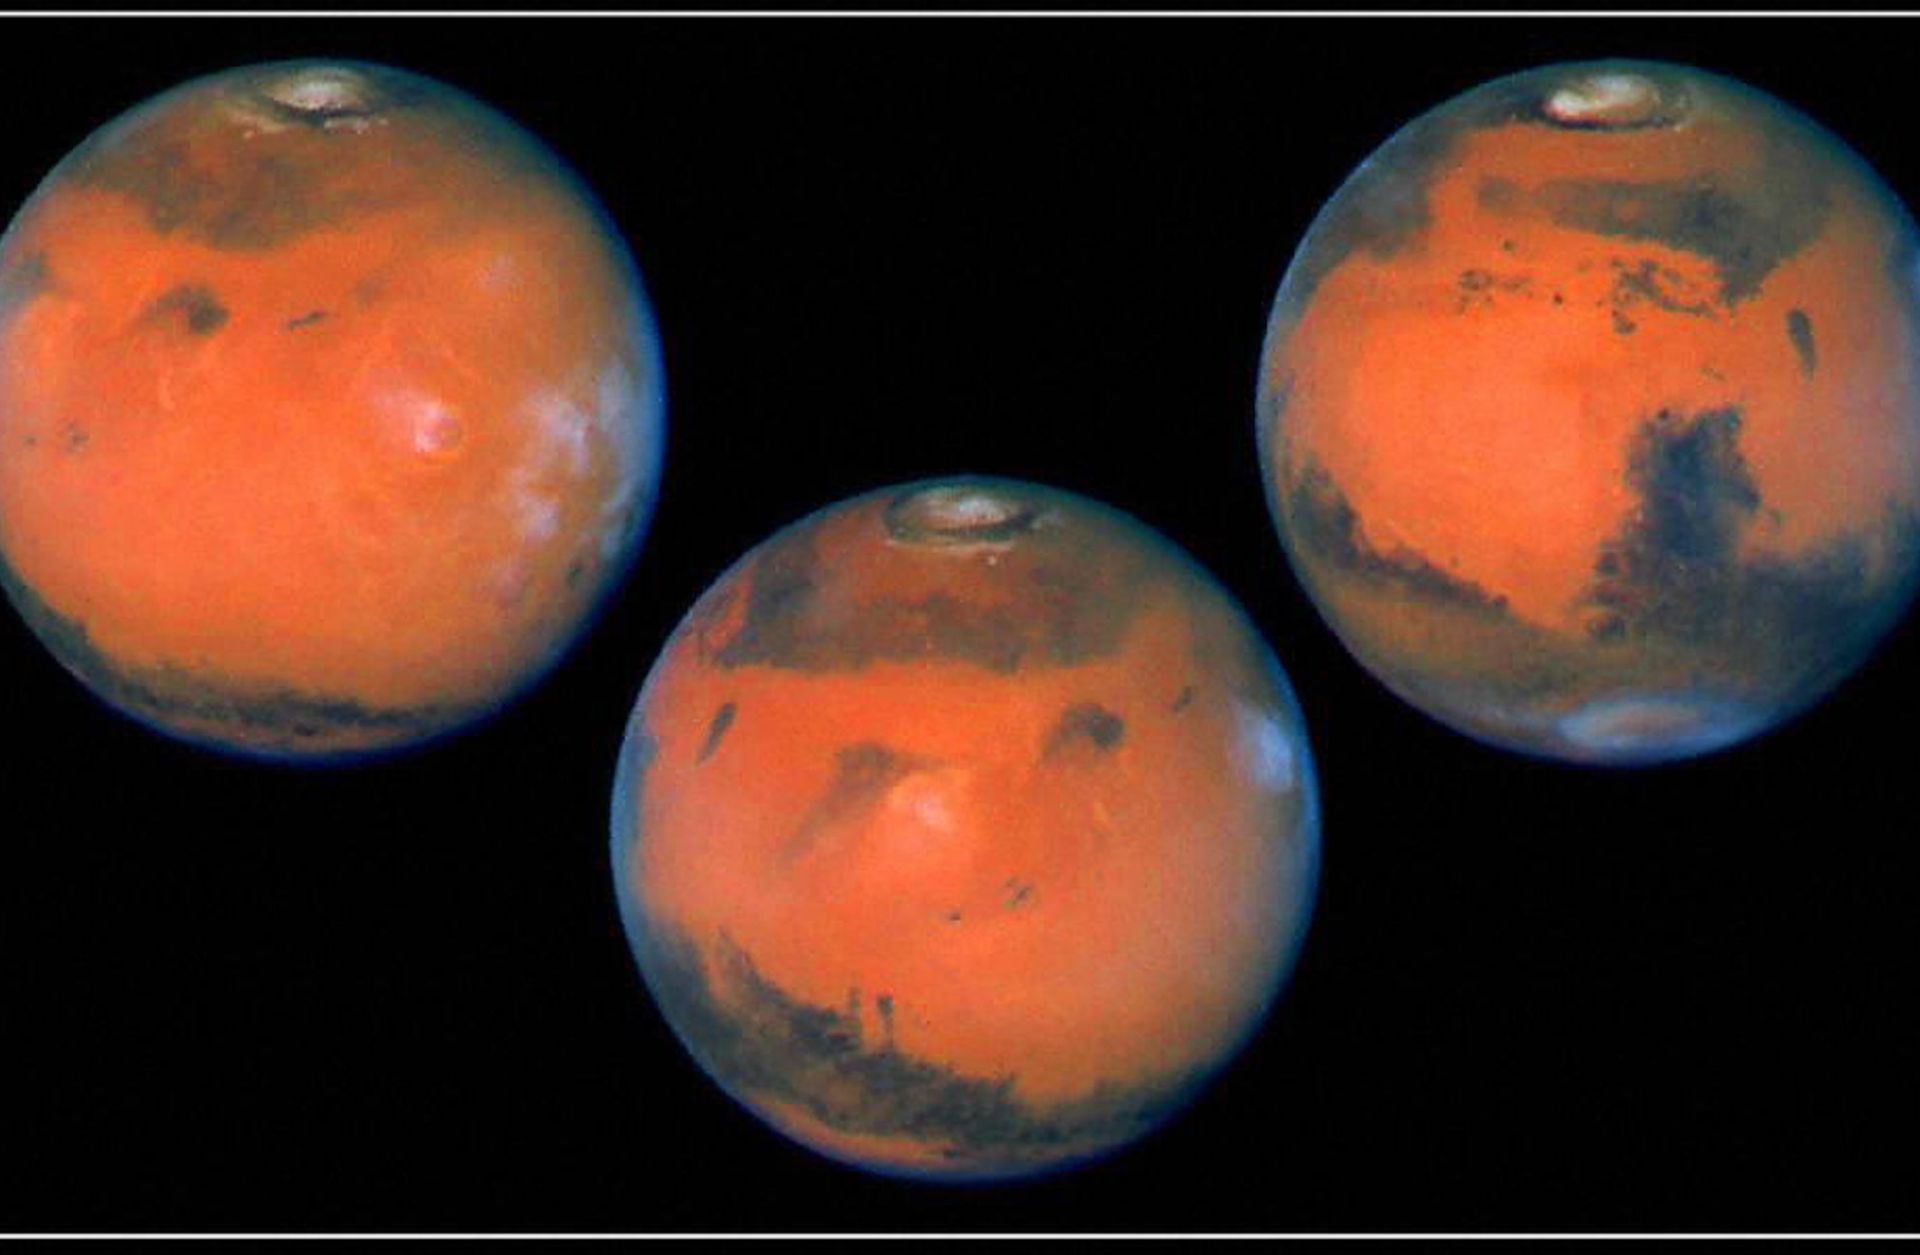 A NASA photo shows a full rotation of the planet Mars as seen through the recently upgraded Hubble Telescope using the wide-field planetary camera. The photos were taken six hours apart, which allows for almost full planetary coverage.